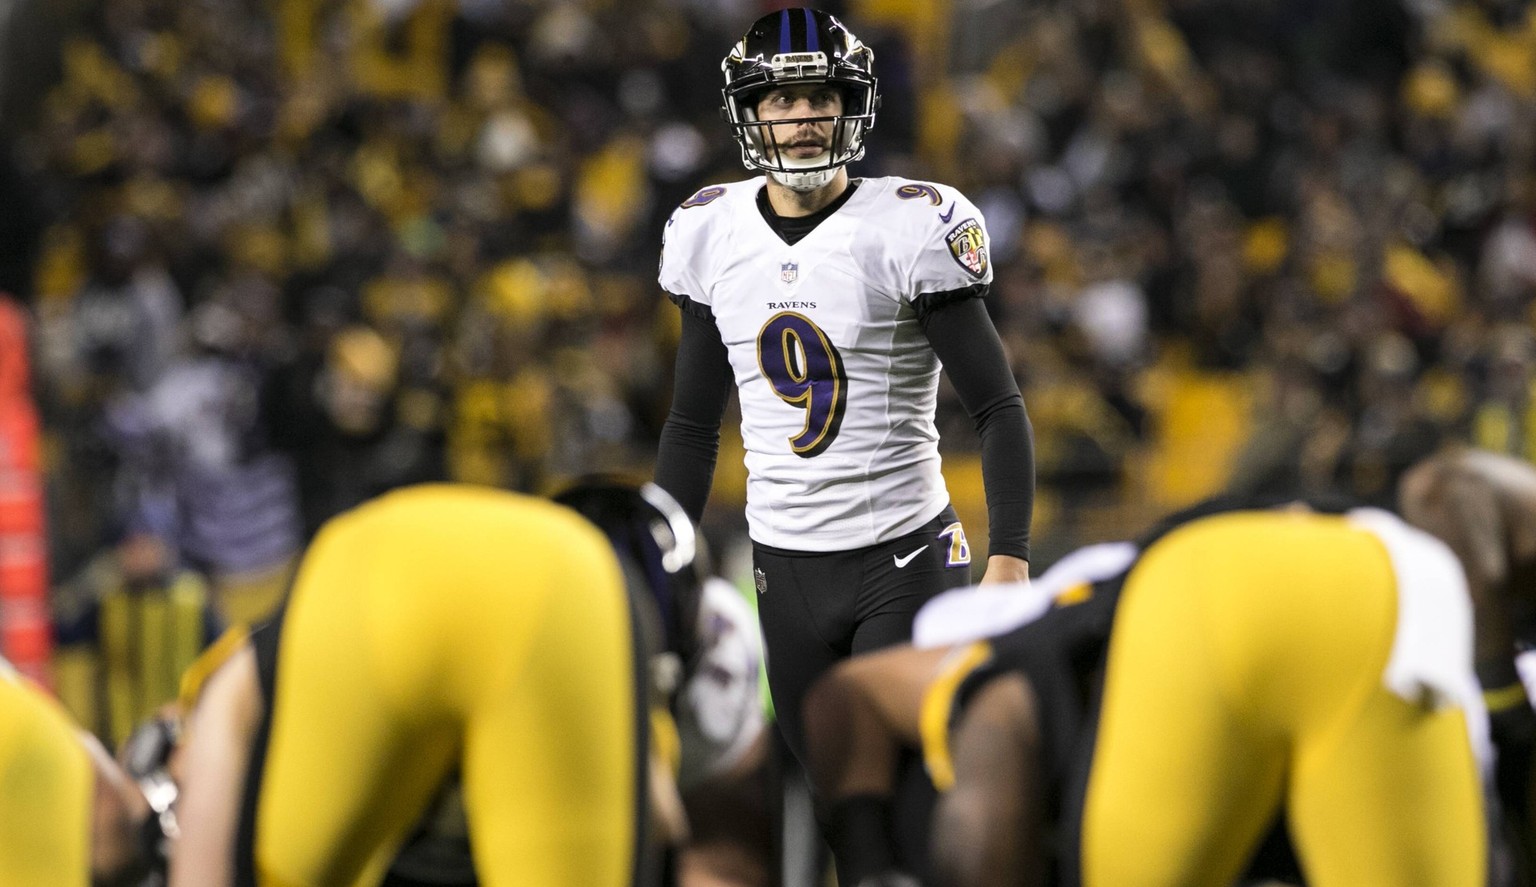 IMAGO / Icon Sportswire

PITTSBURGH, PA - DECEMBER 10: Baltimore Ravens Kicker Justin Tucker (9) eyes up a field goal attempt during the game between the Baltimore Ravens and the Pittsburgh Steelers o ...